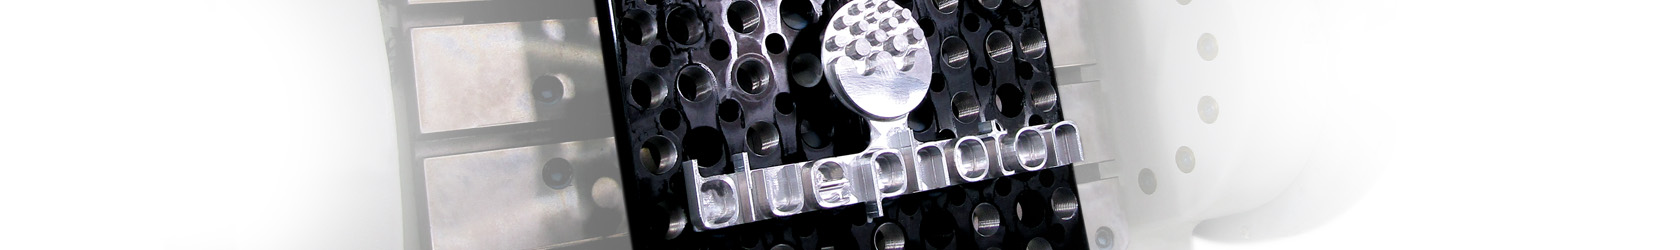 The Blue Photon logo machined into a piece of metal